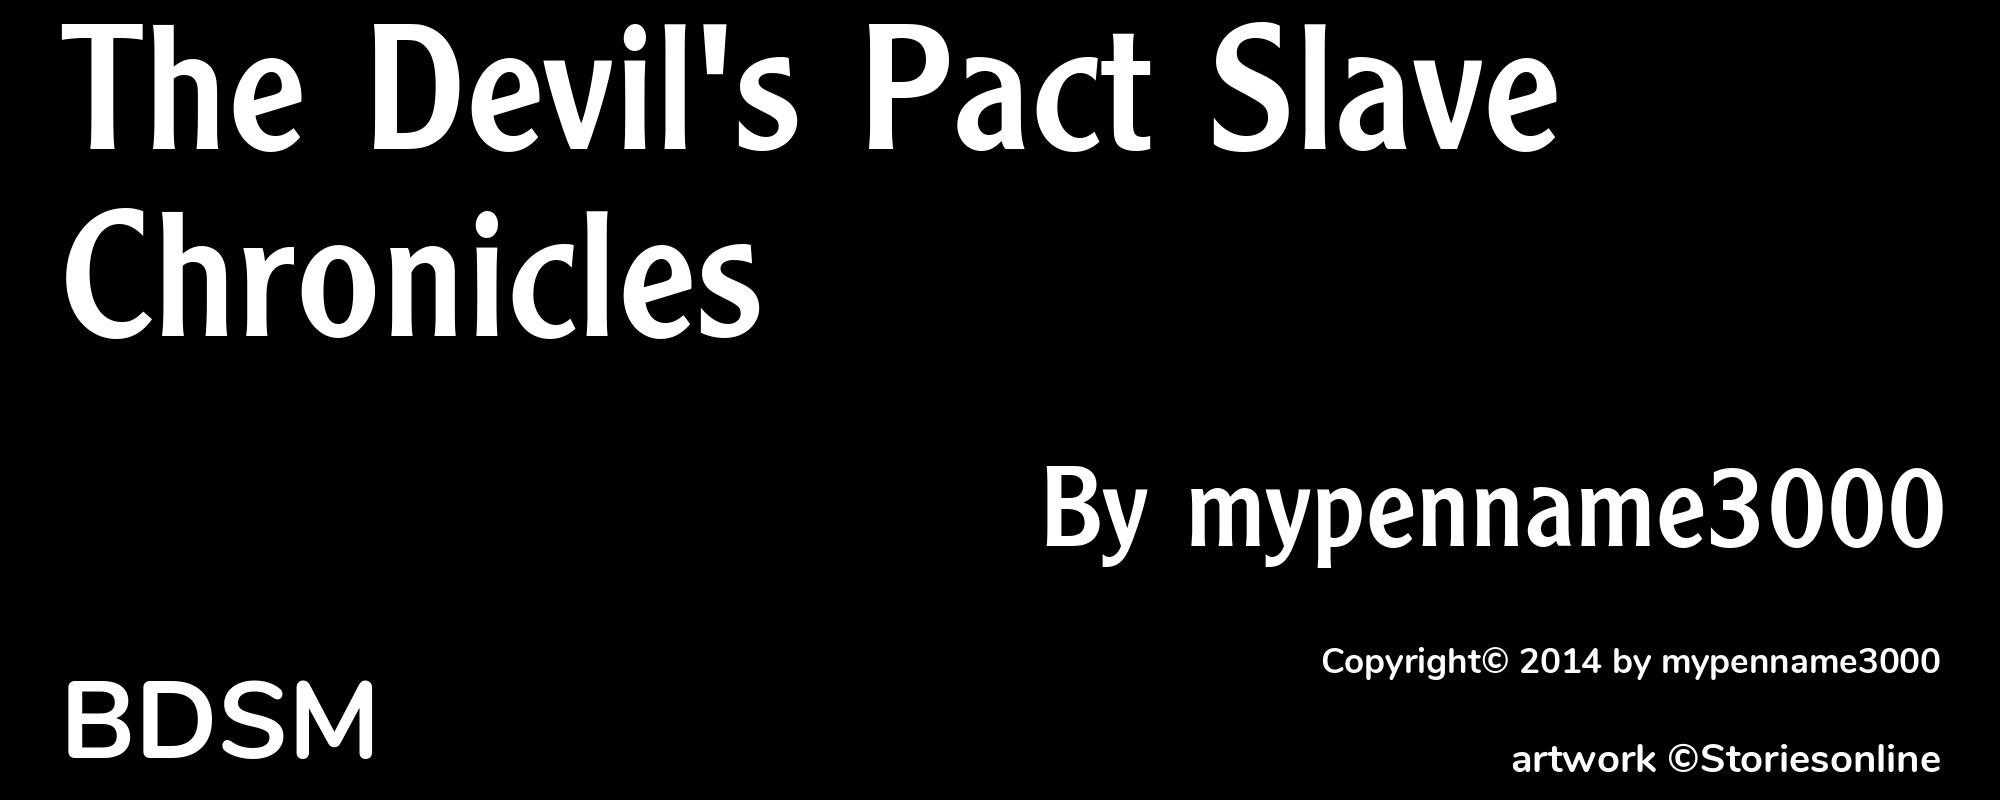 The Devil's Pact Slave Chronicles - Cover